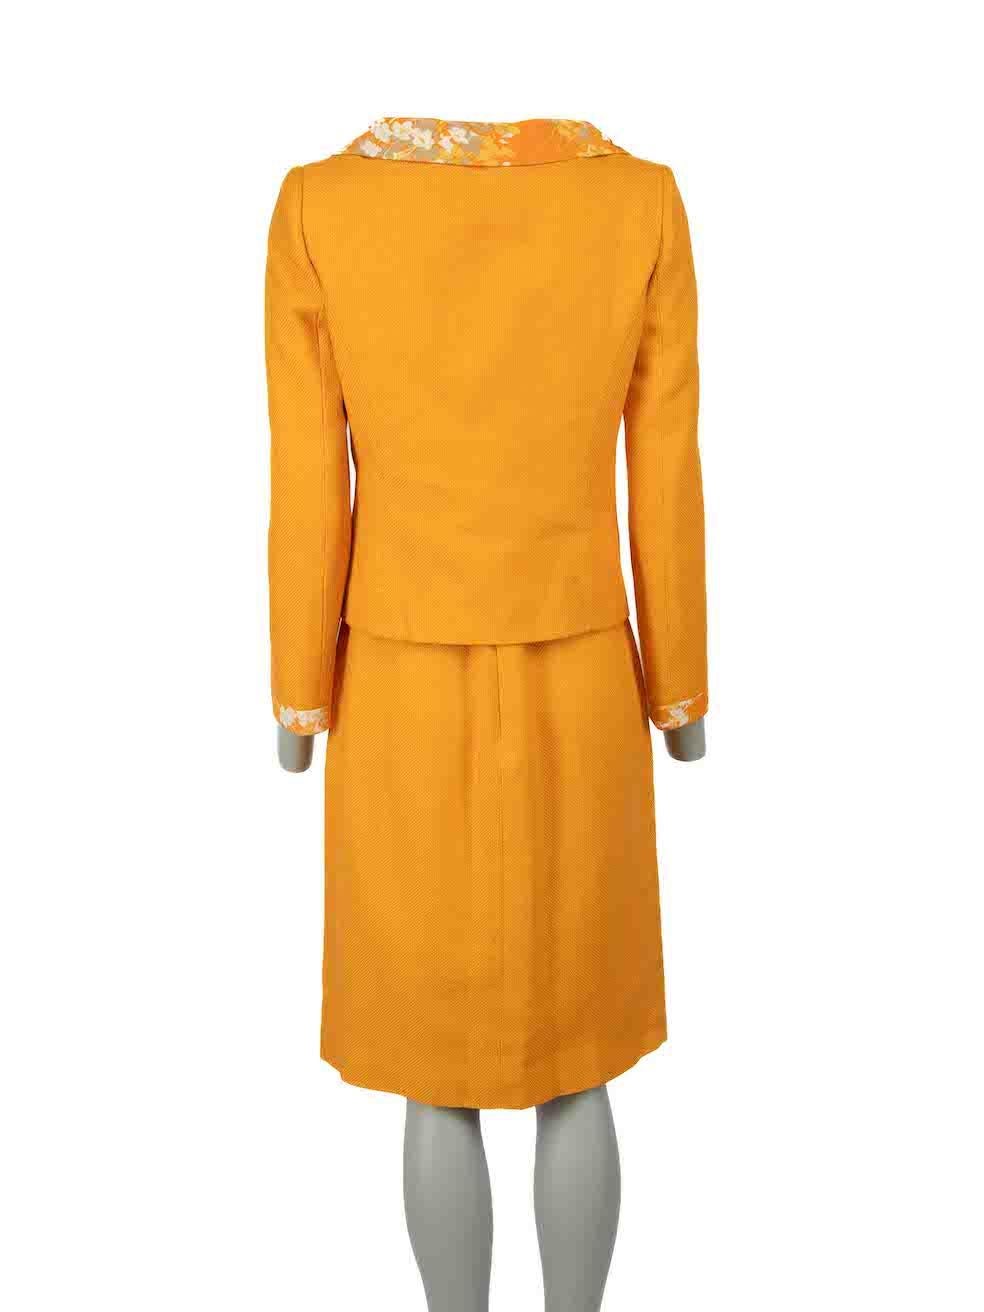 CONDITION is Very good. Minimal wear to set is evident. Minimal wear to lining of dress where stain marks and pull to weave on internal hemline is evident on this used Valentino designer resale item.

Details

Vintage
Orange
Cotton
Jacket and dress